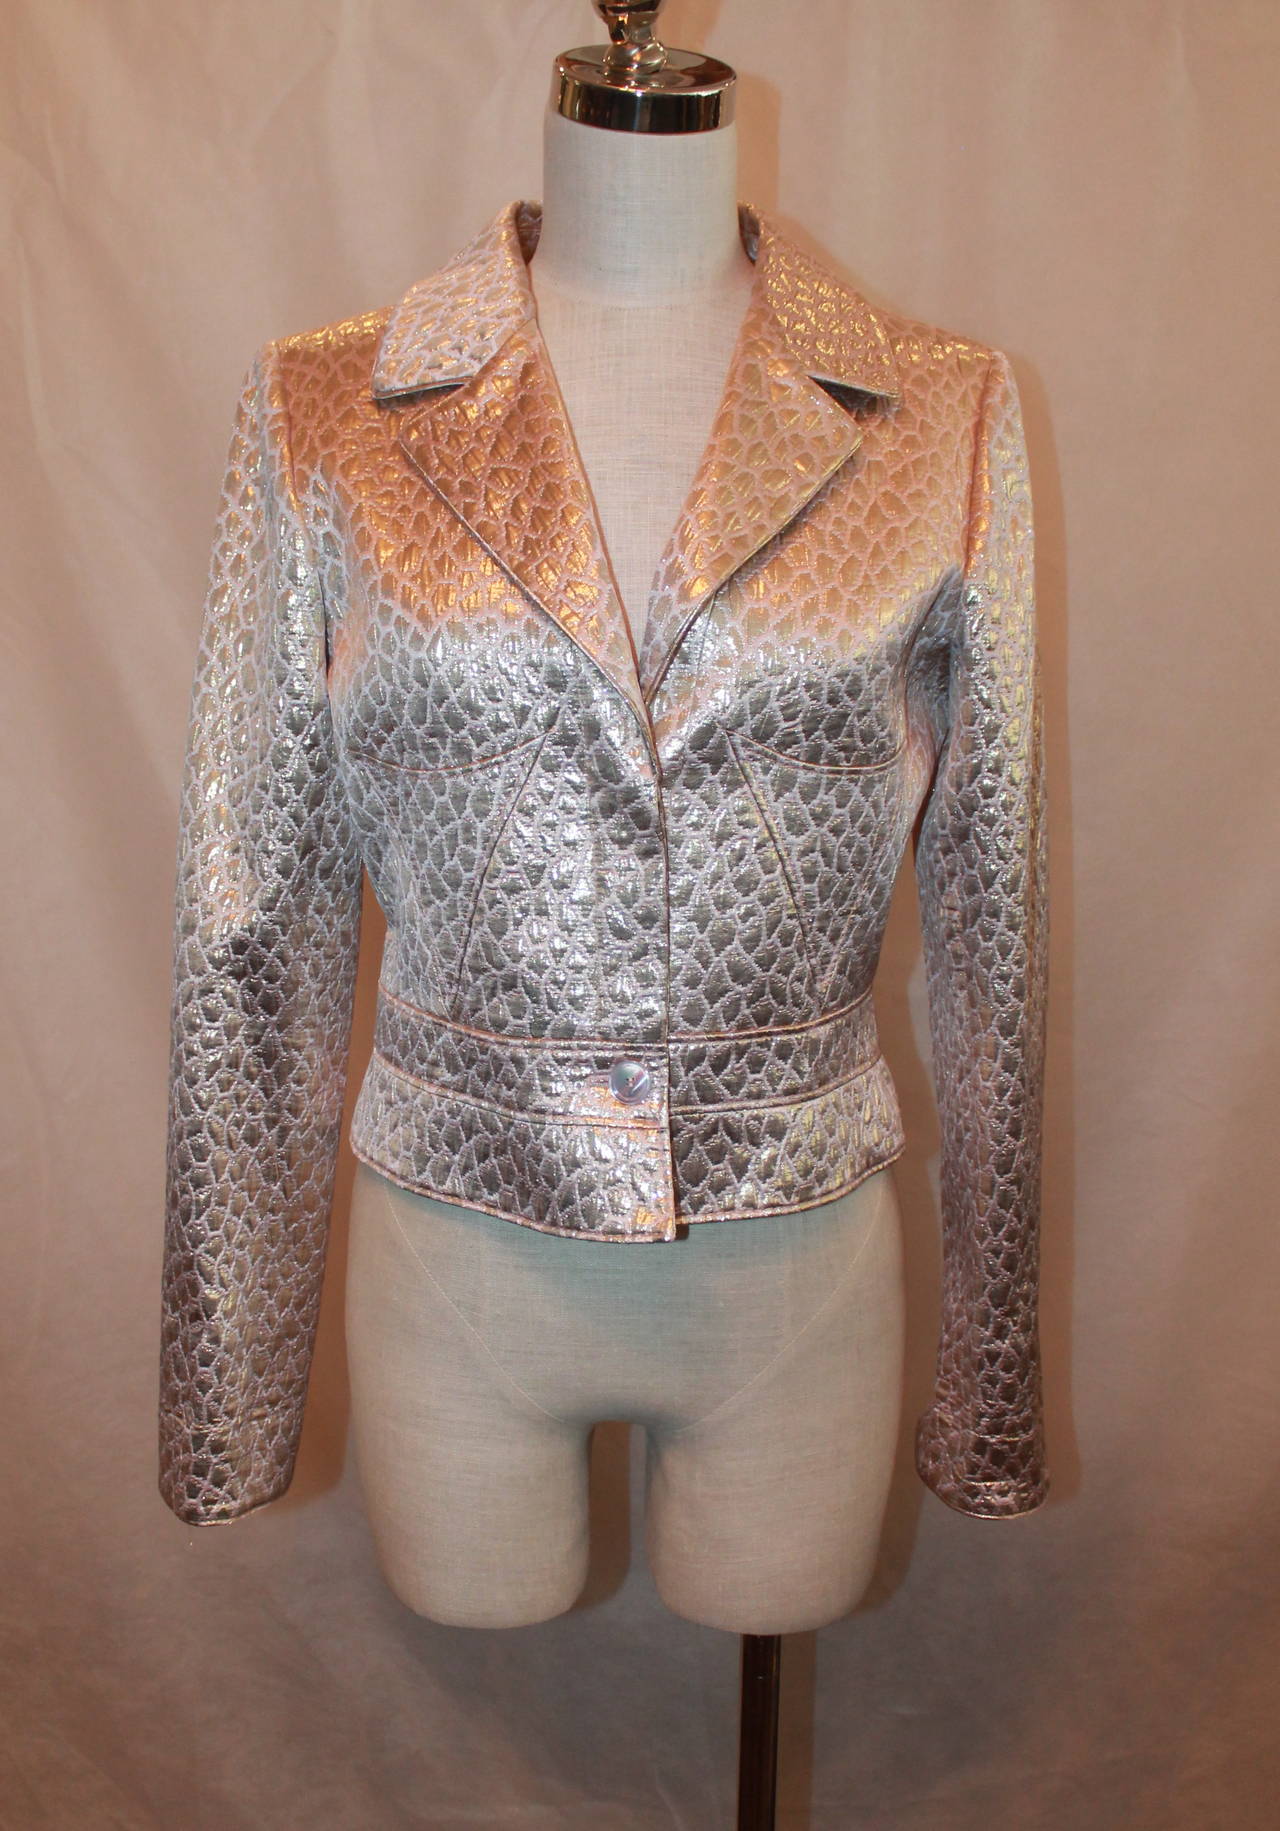 Valentino 1990's Vintage Rose Gold Pink Silk Brocade Jacket - 8. This jacket is in excellent condition and is printed.

Measurements:
Bust- 38